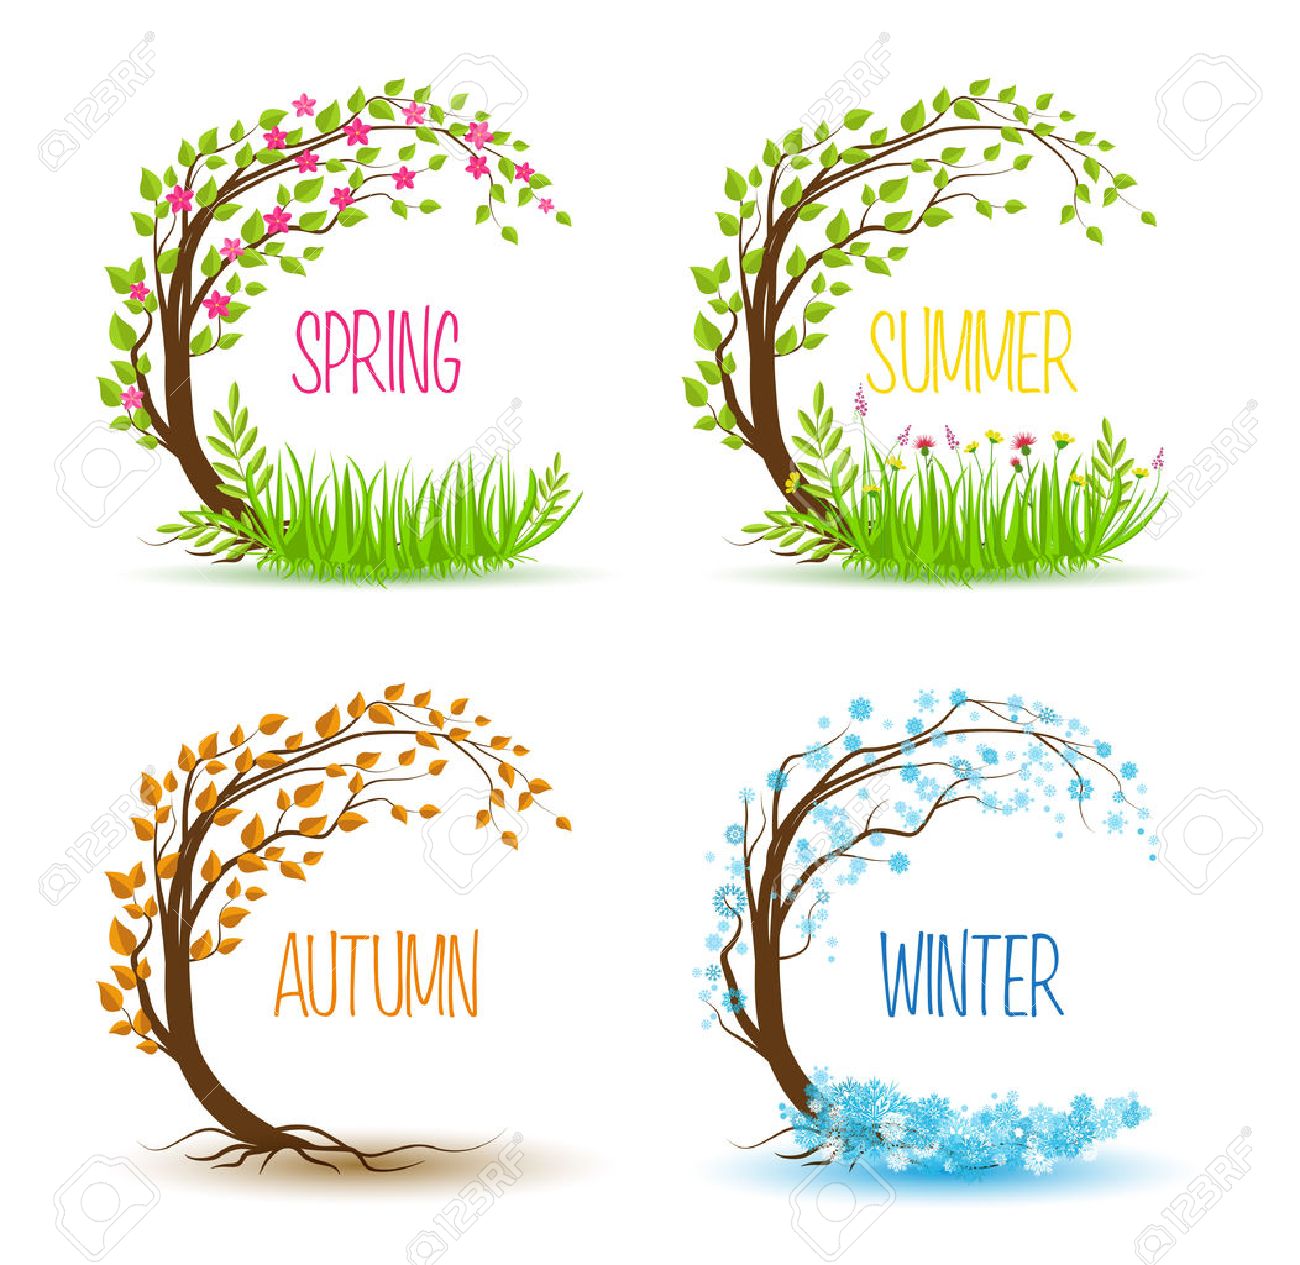 Winter Spring Cliparts Free Download Clip Art.